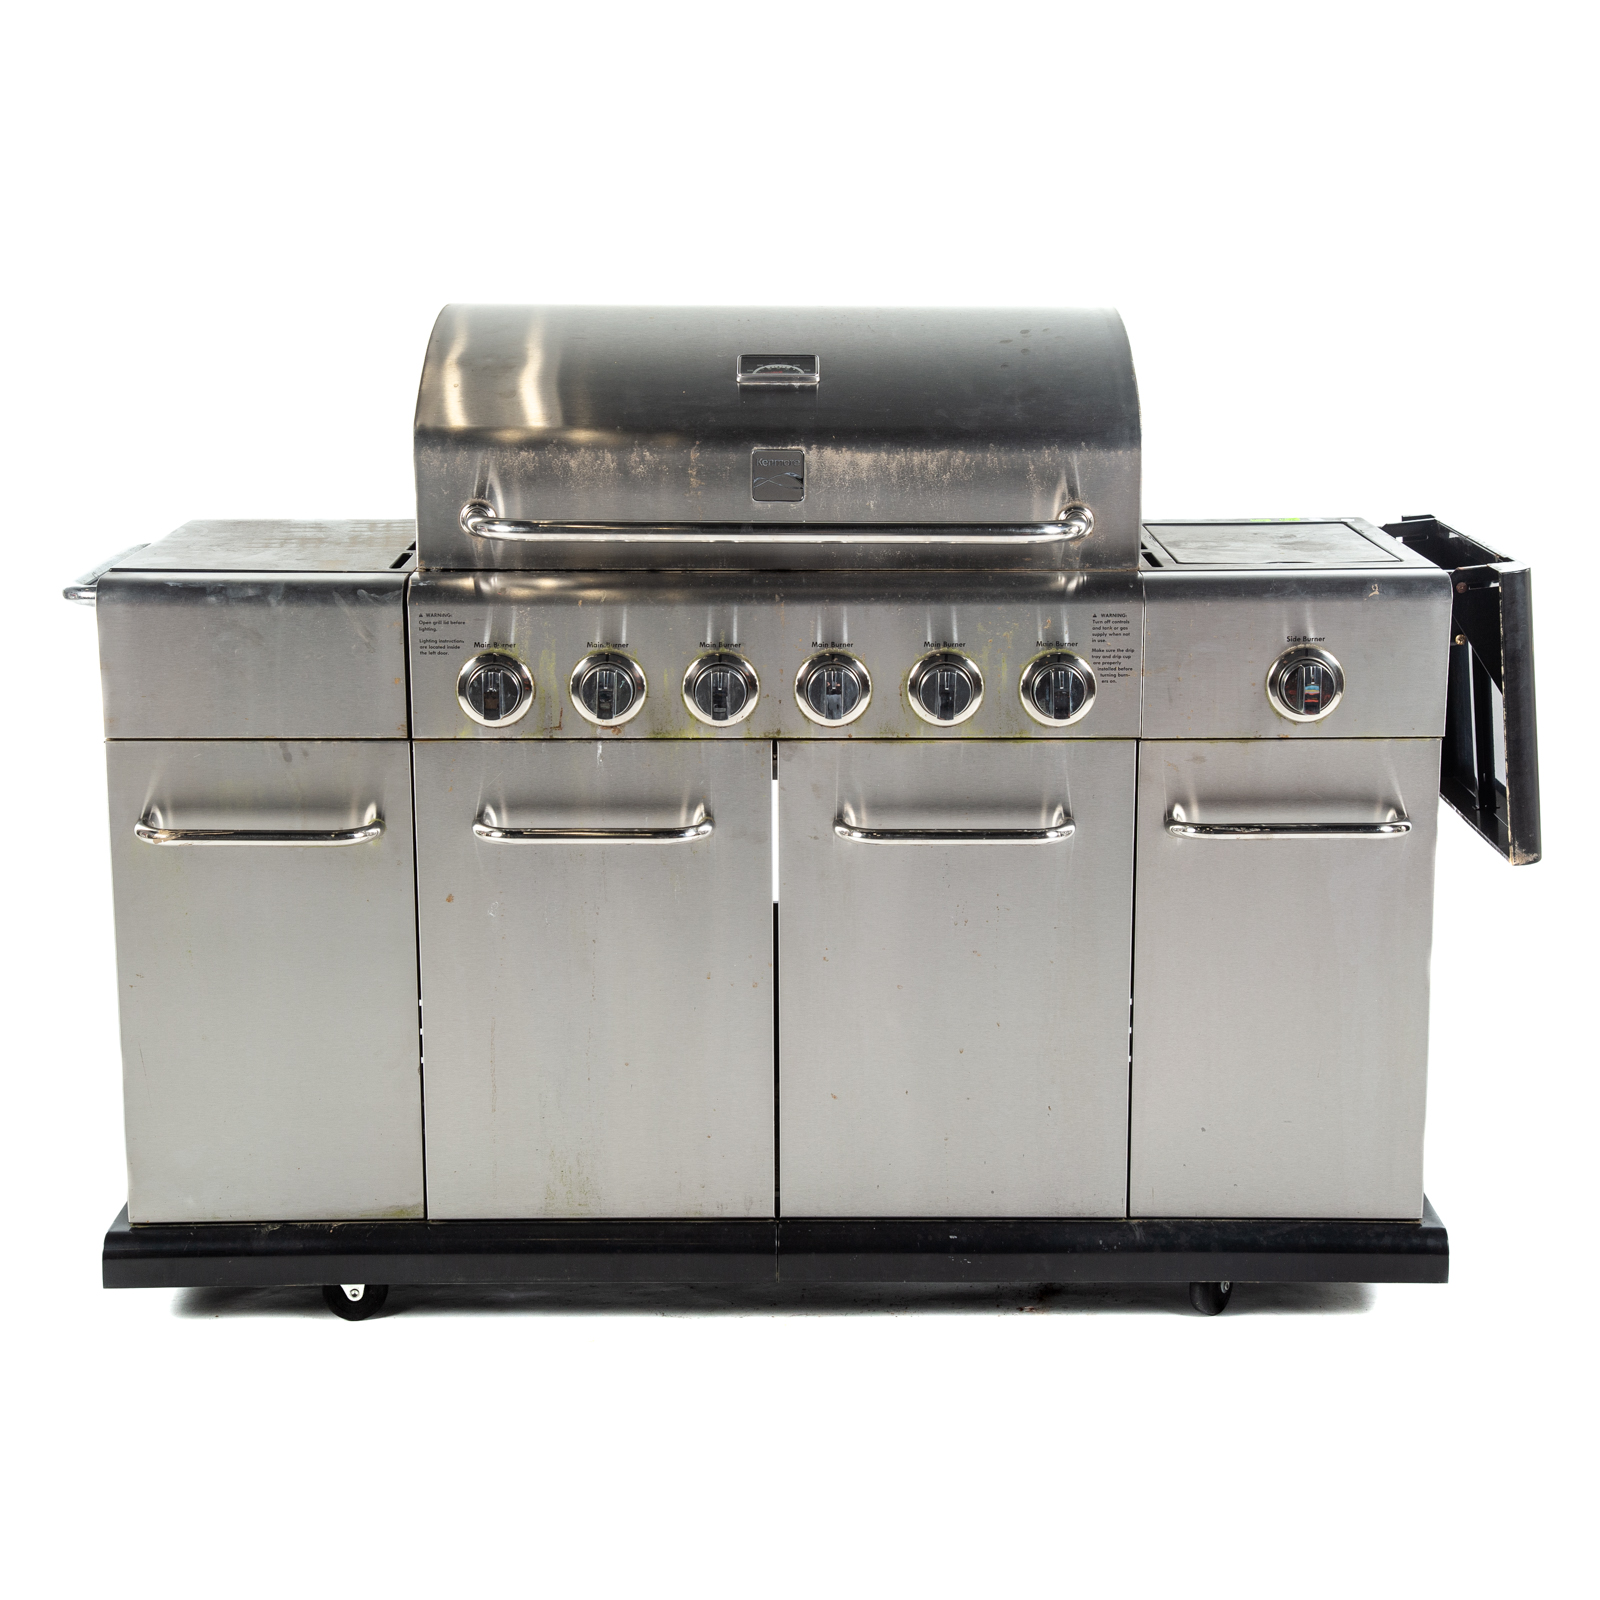 KENMORE GAS GRILL Propane fueled 2eaead